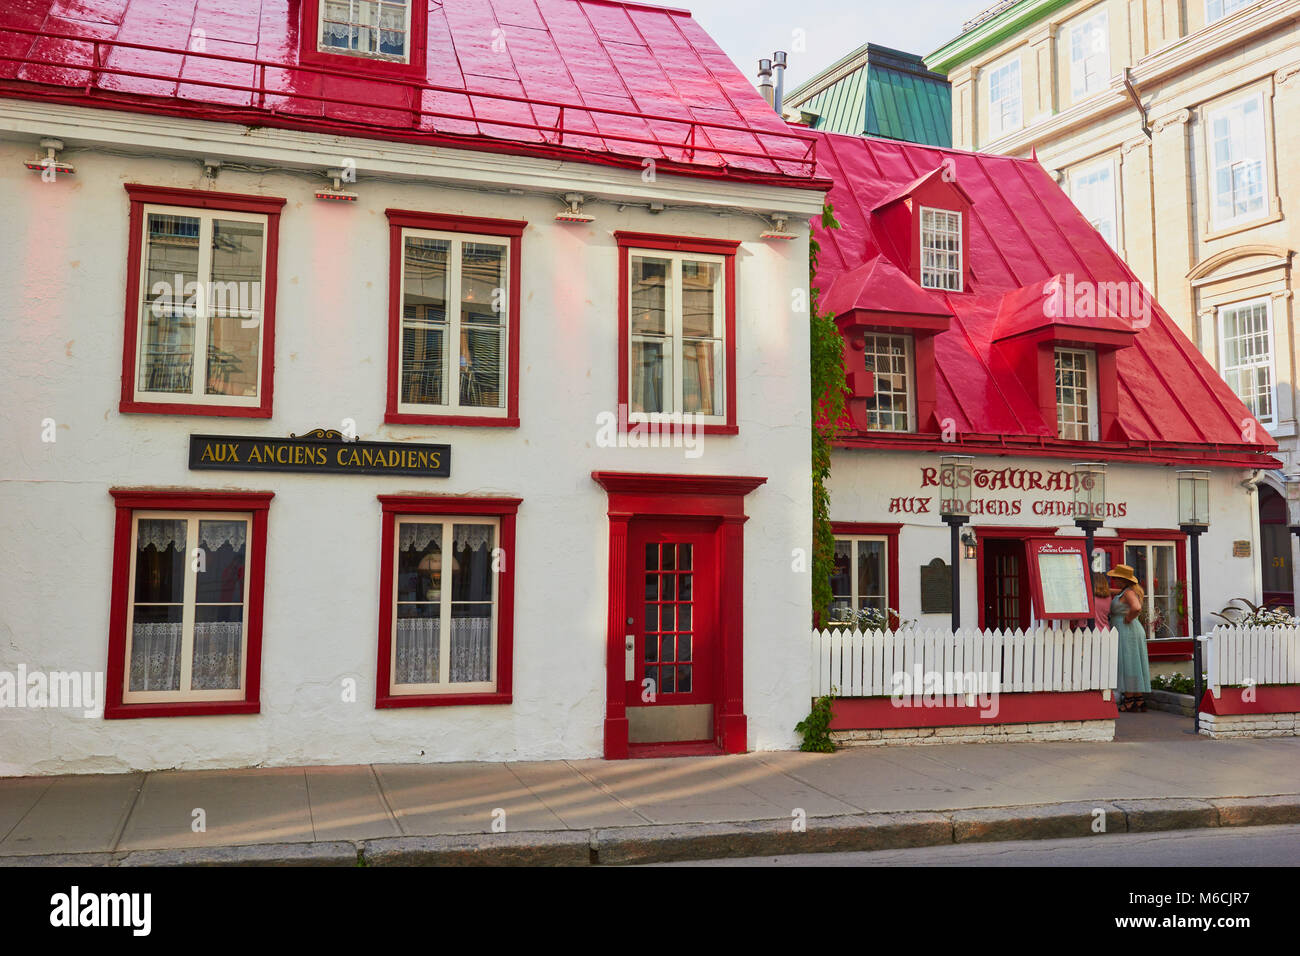 Restaurant Aux Anciens Canadiens, Quebec City, Quebec, Canada. Built in 1675-76 and formerly known as Maison Jaquet, has been a restaurant since 1966 Stock Photo